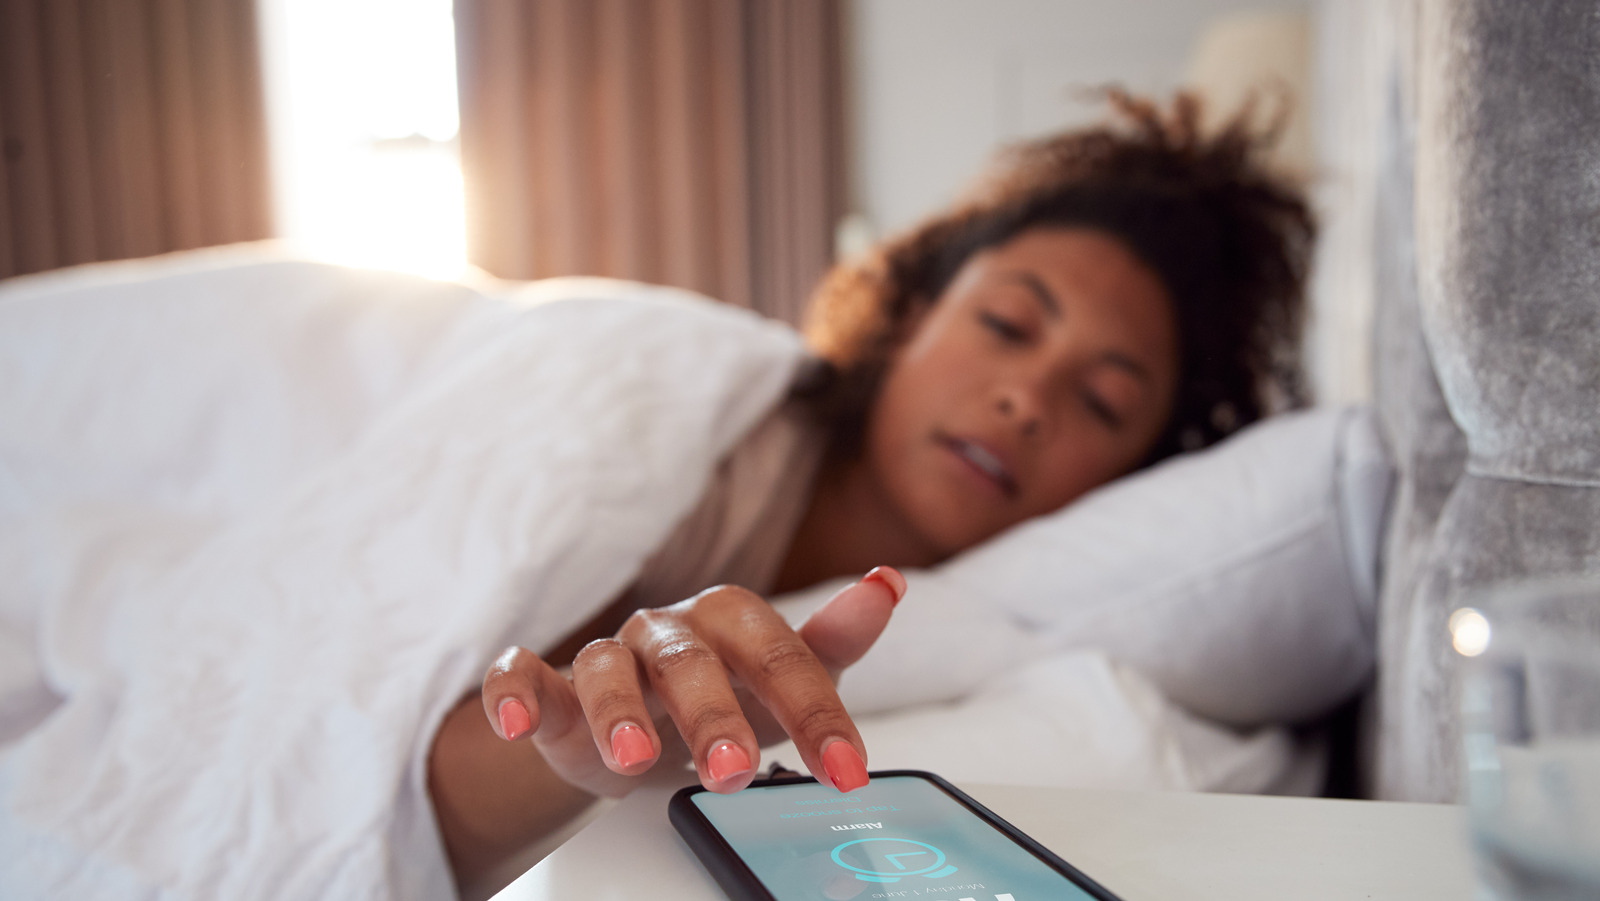 Whoop Vs Oura: Which Is Better For Tracking Sleep?